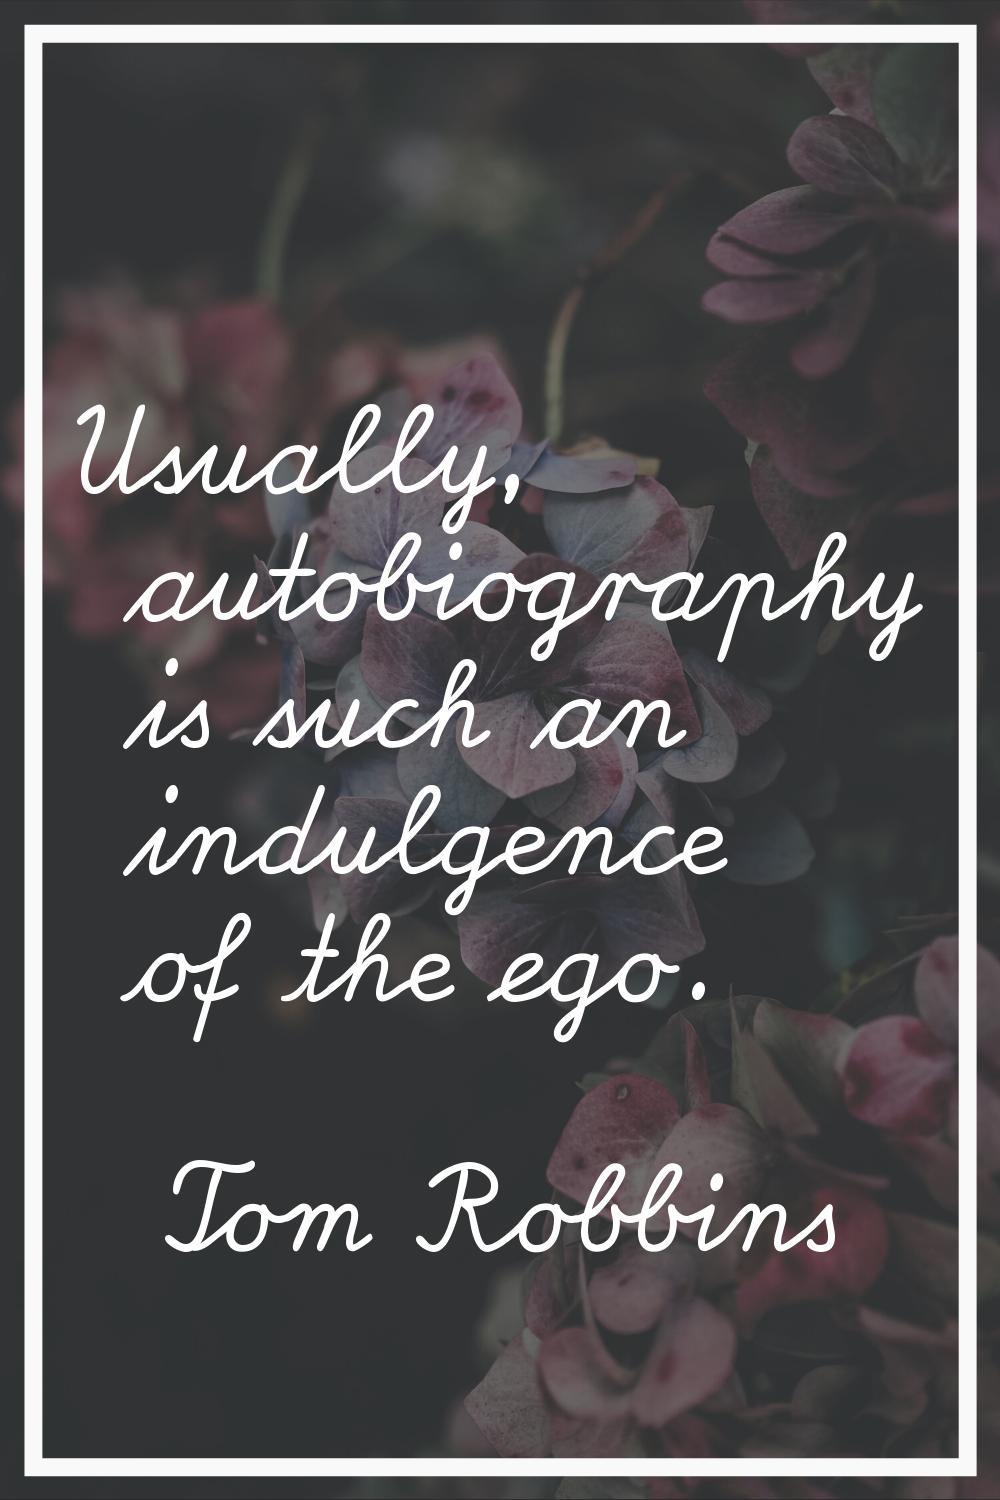 Usually, autobiography is such an indulgence of the ego.